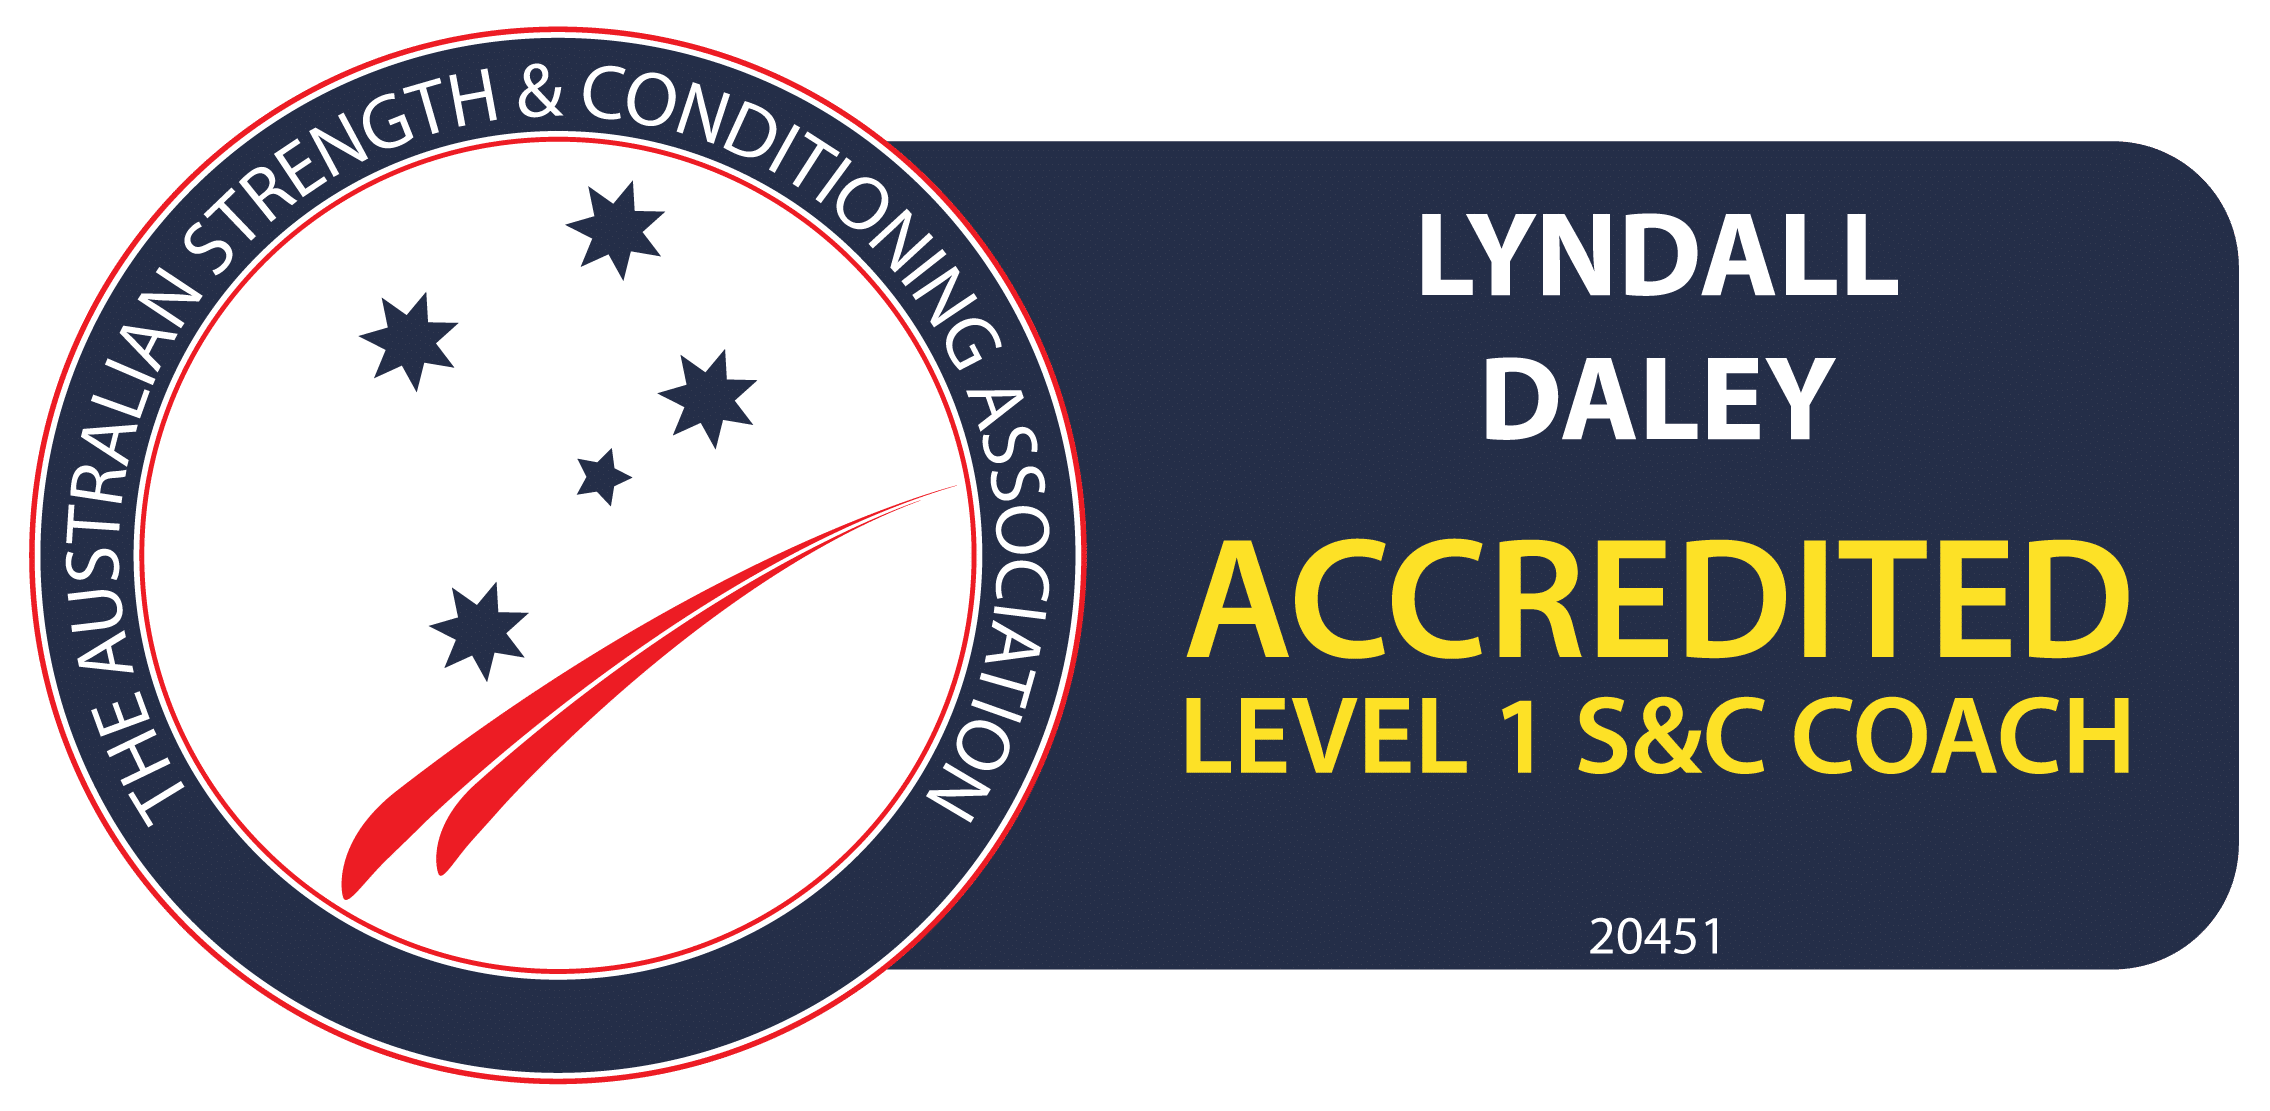 Australian Strength & Conditioning Association - Accredited Coach